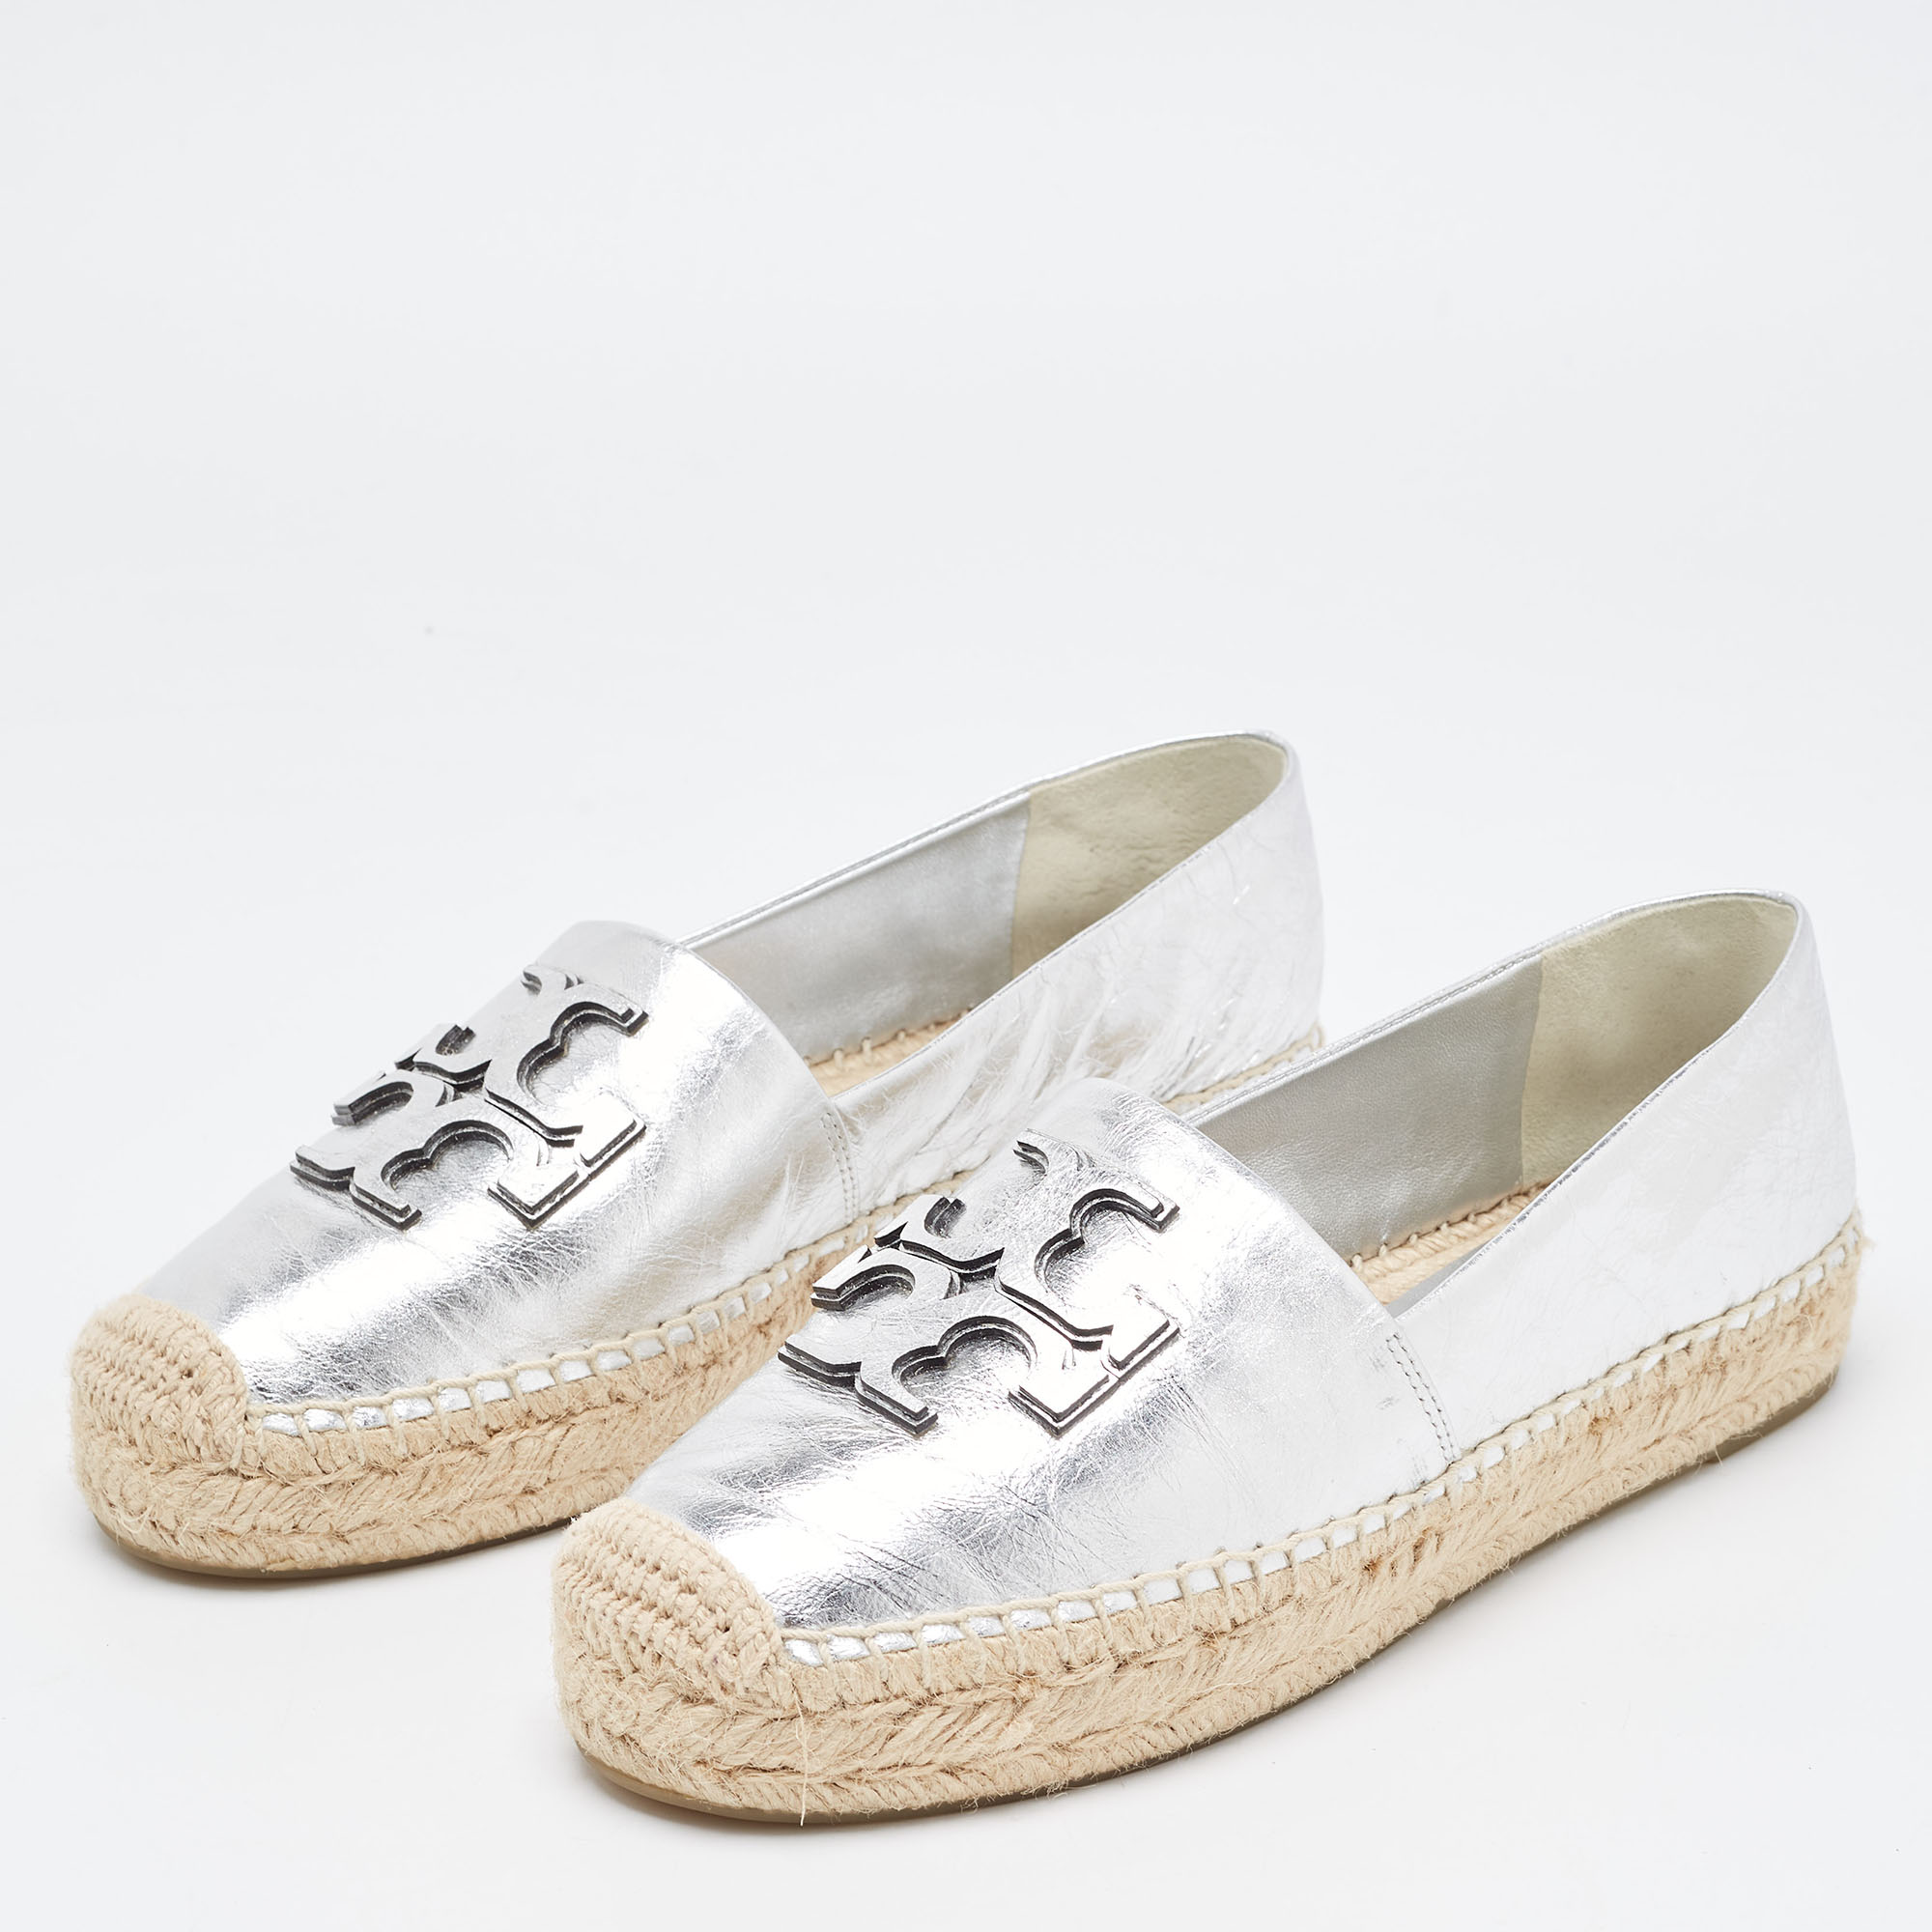 

Tory Burch Metallic Silver Leather Ines Espadrille Flats Size